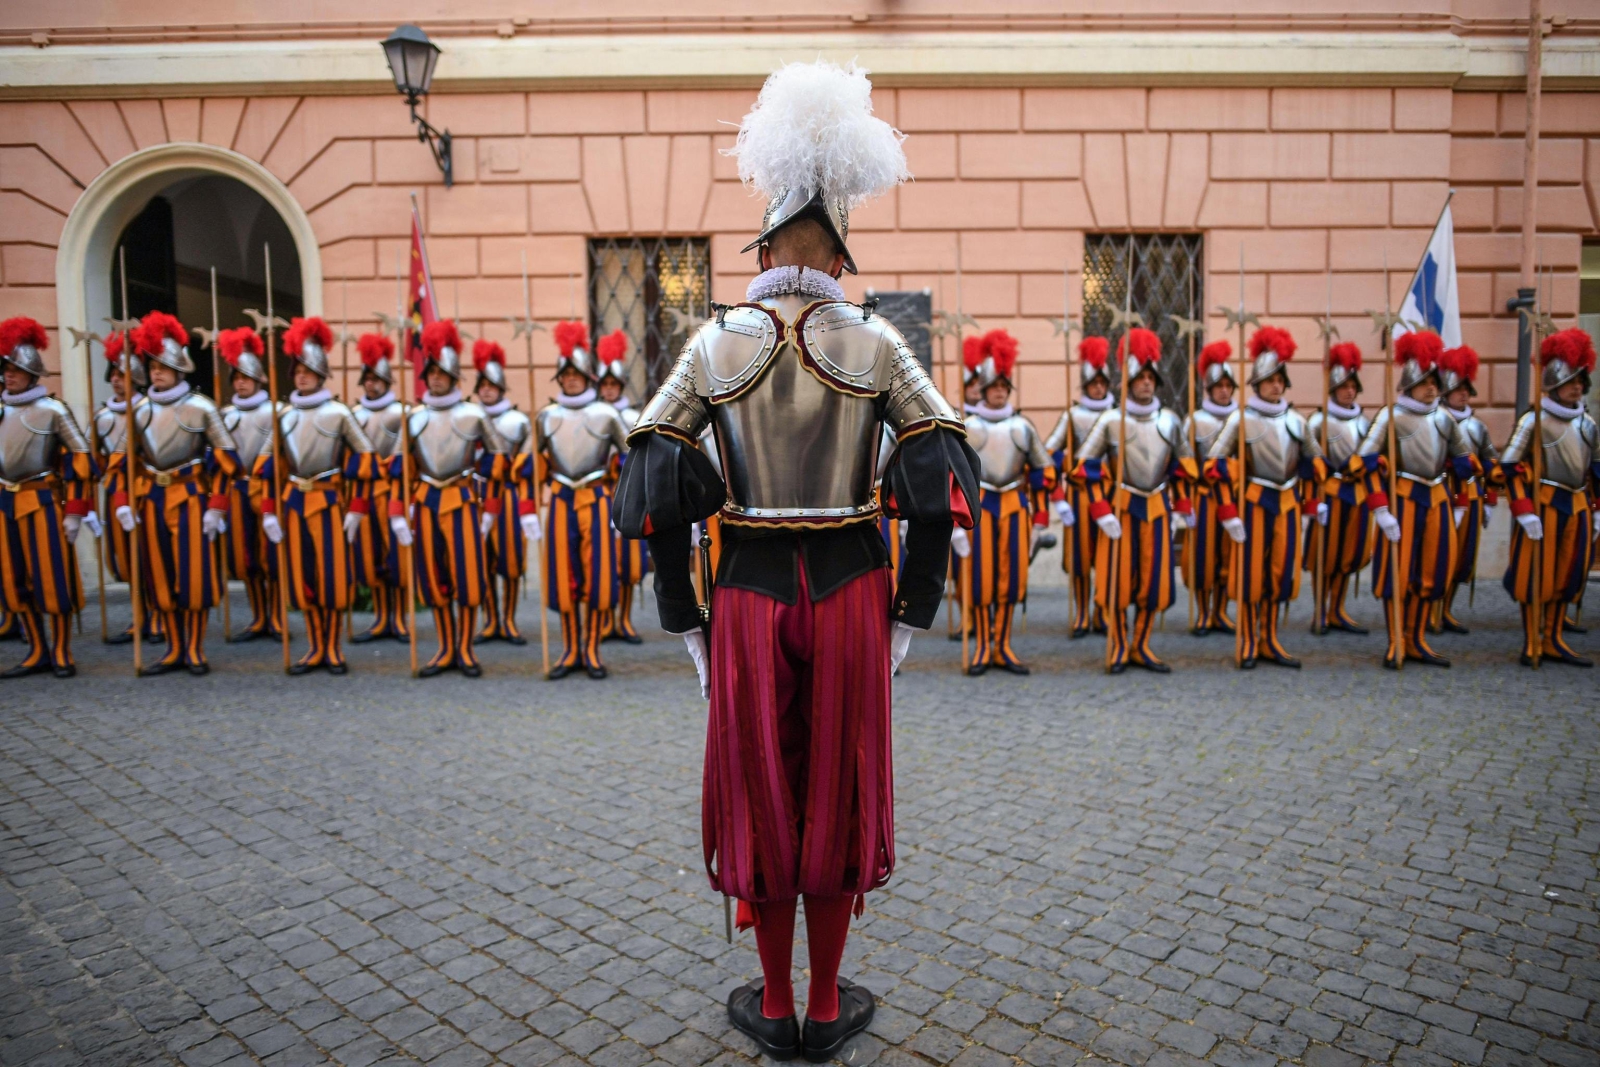 epa05947047 Papal Swiss Guards before the swearing-in ceremony at the San Damaso Courtyard in Vatican City, 06 May 2017. The annual swearing in ceremony for the new papal Swiss guards takes place on 06 May, commemorating the 147 who died defending Pope Clement VII on the same day in 1527.  EPA/ALESSANDRO DI MEO 
Dostawca: PAP/EPA.